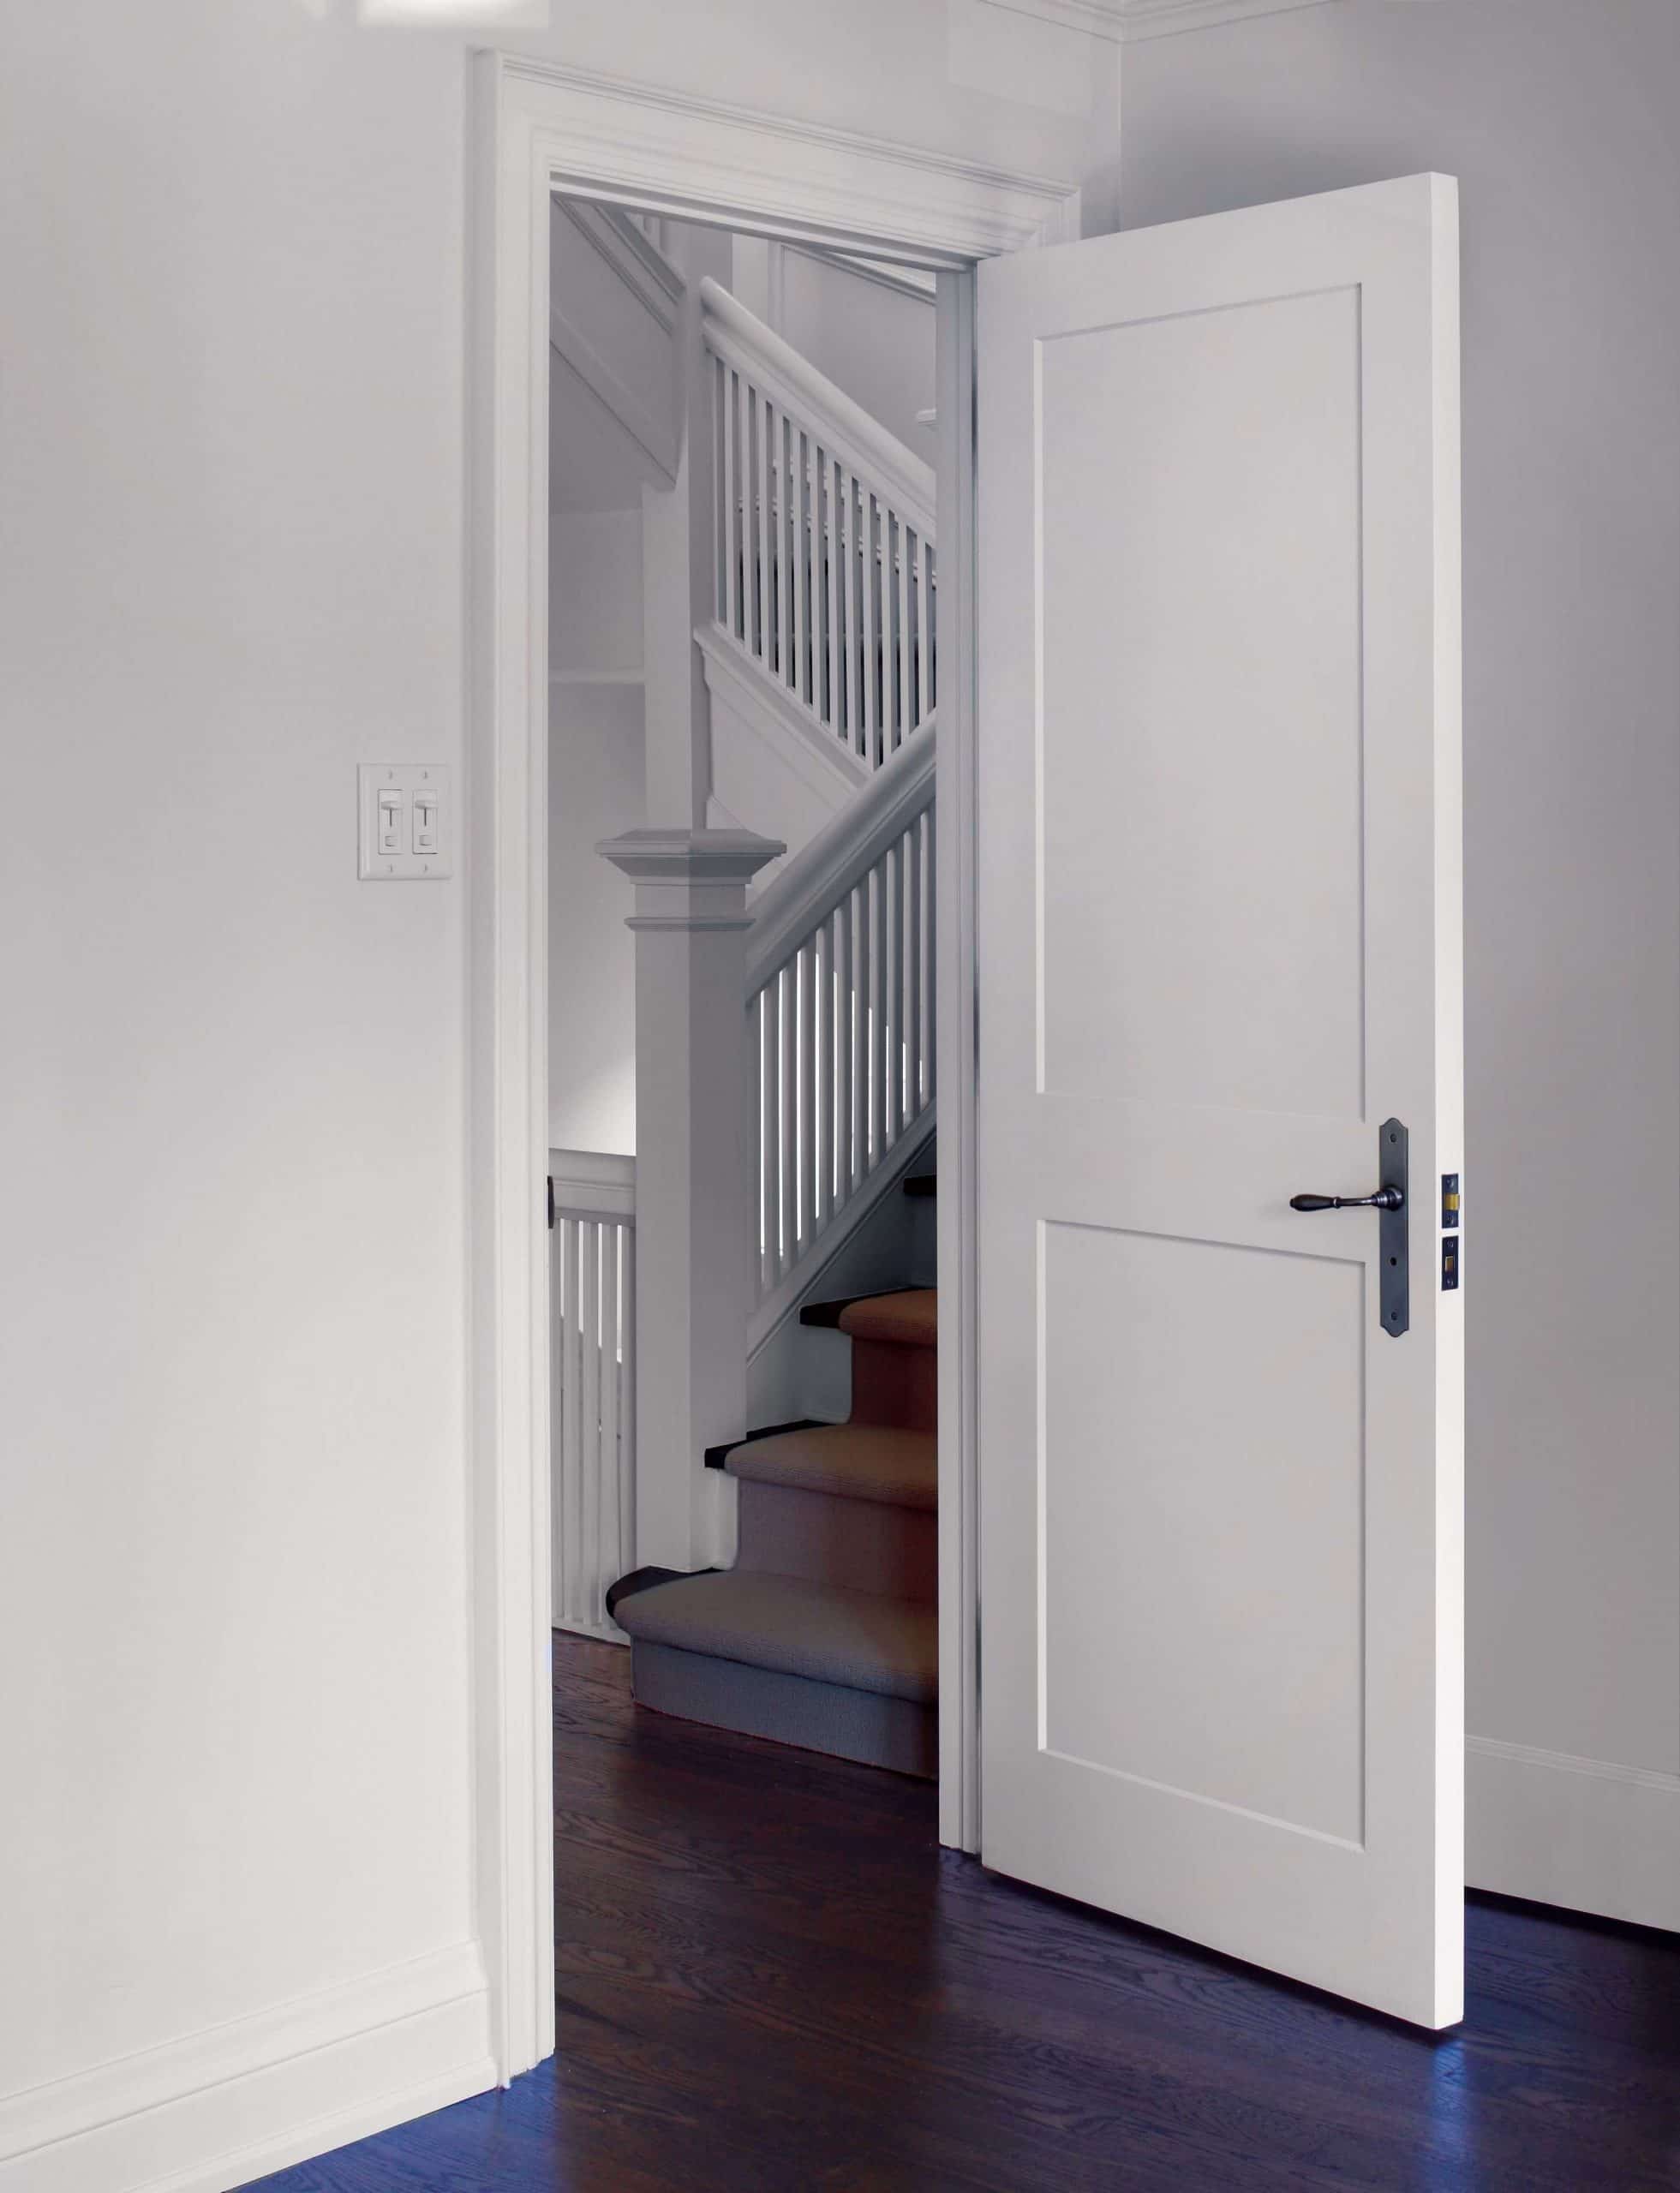 An open panel door leading to a stairway in a house
